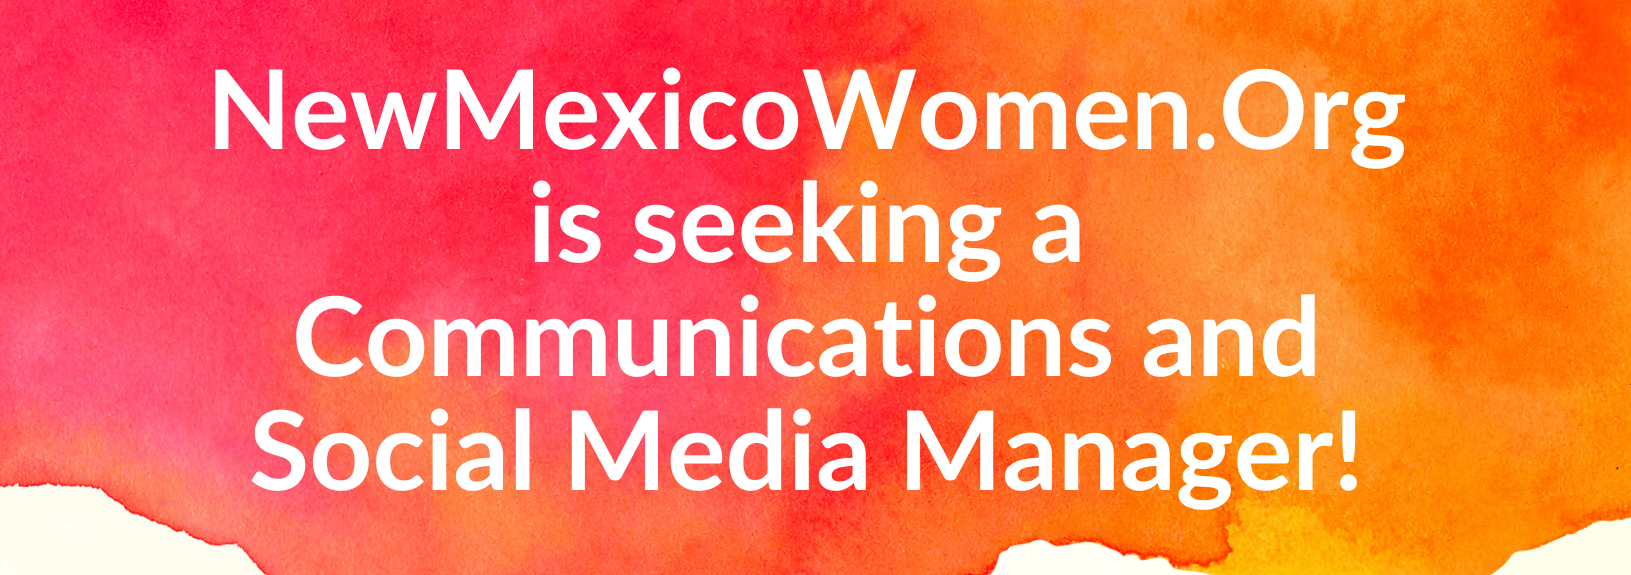 We are hiring a Communications and Social Media Manager!